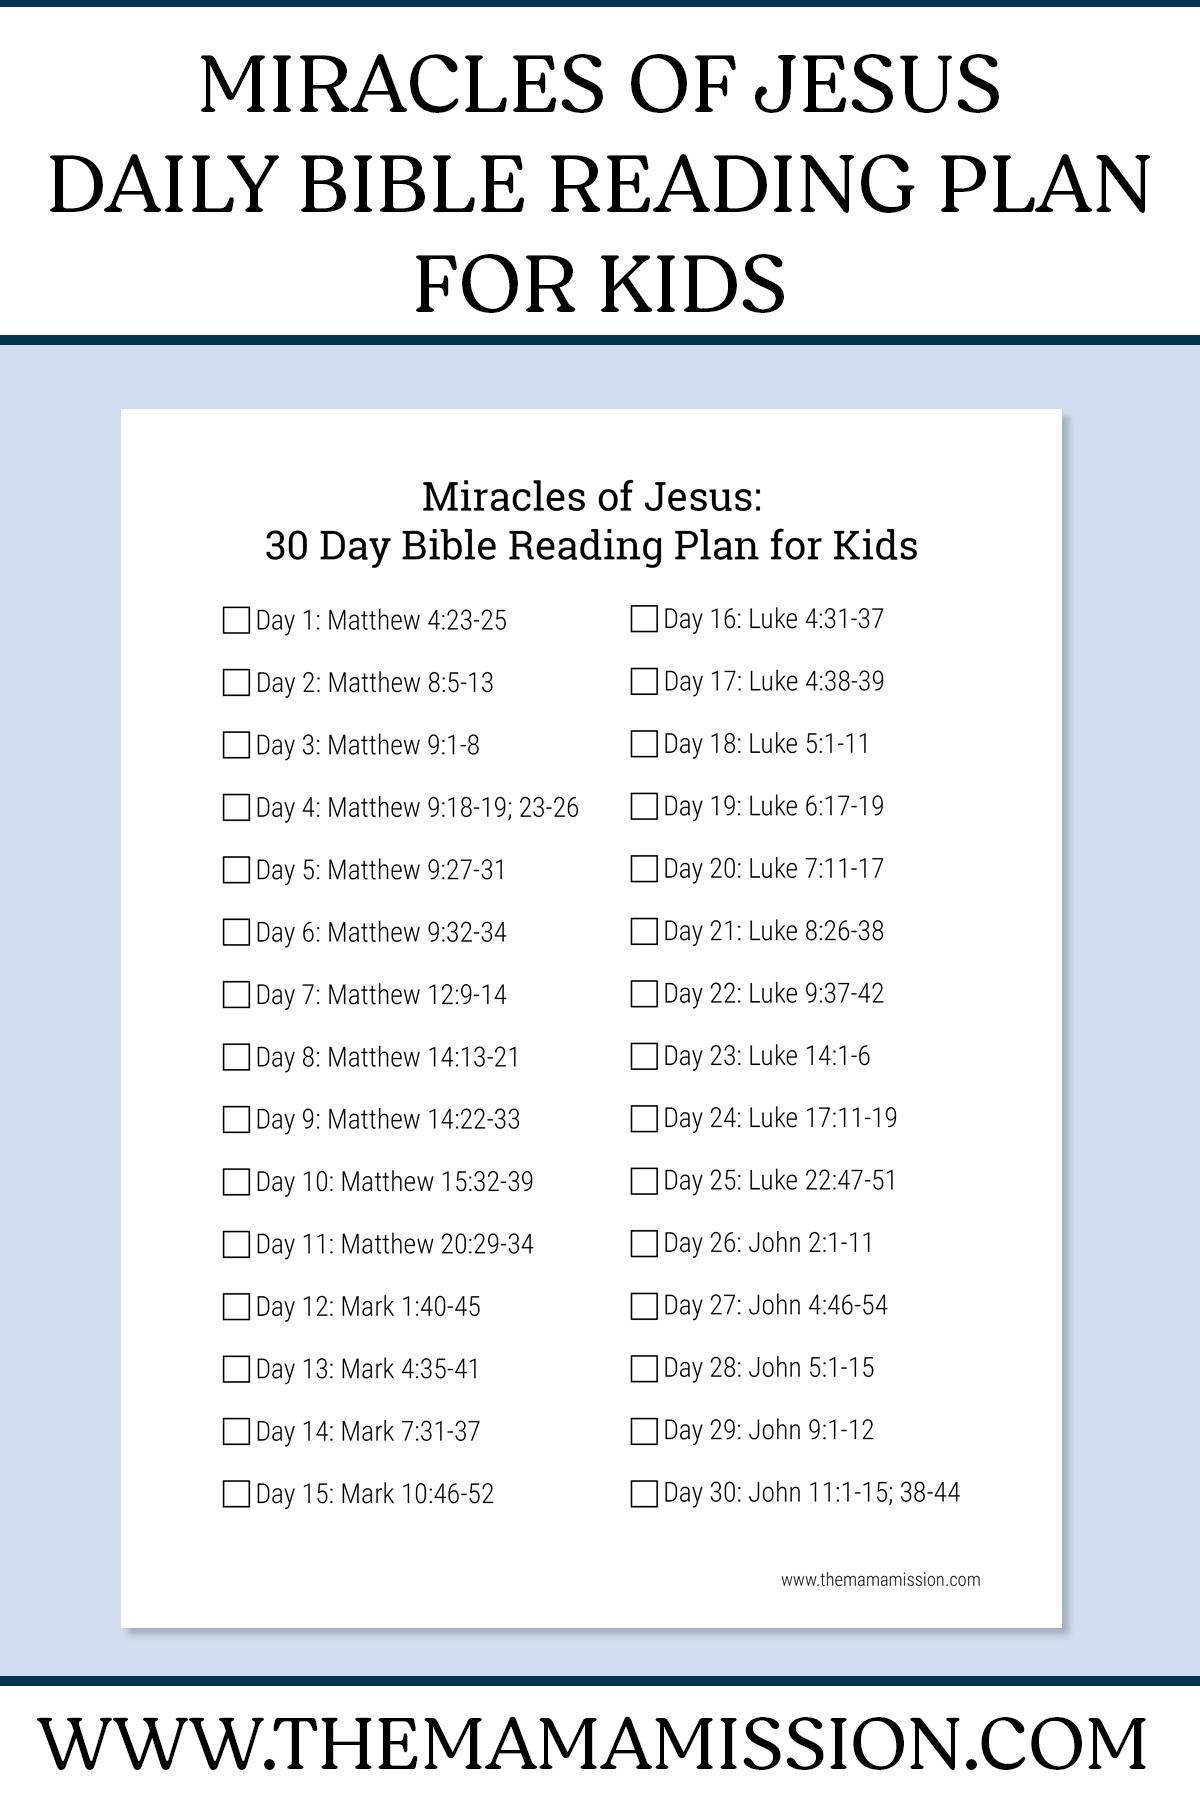 Miracles of Jesus Daily Bible Reading Plan for Kids - The Mama Mission